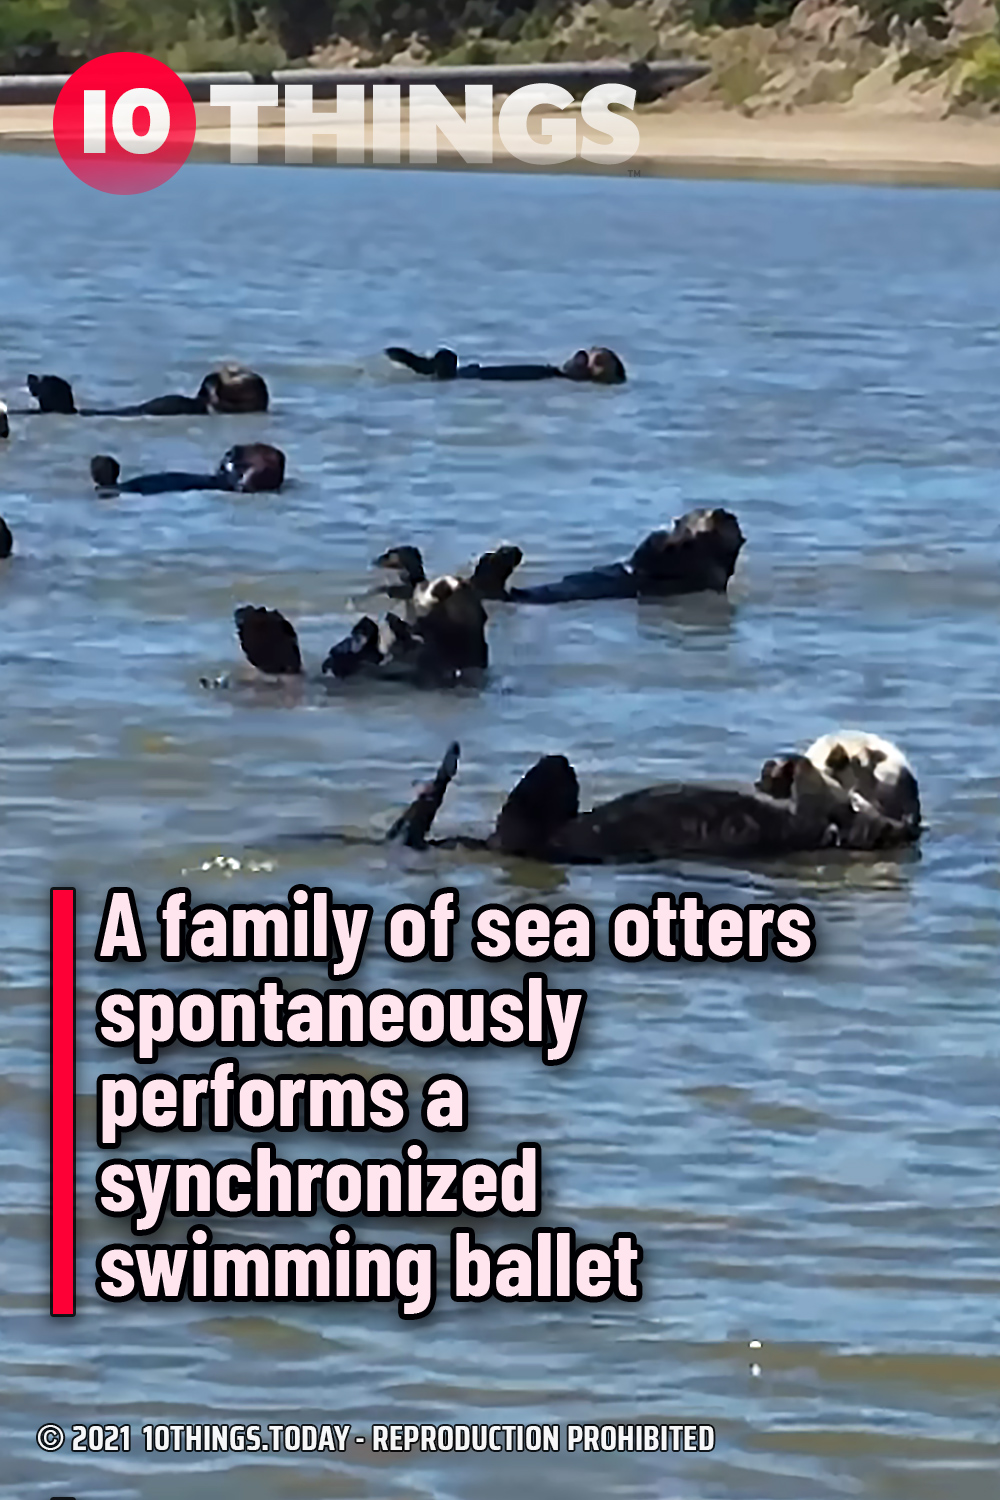 A family of sea otters spontaneously performs a synchronized swimming ballet